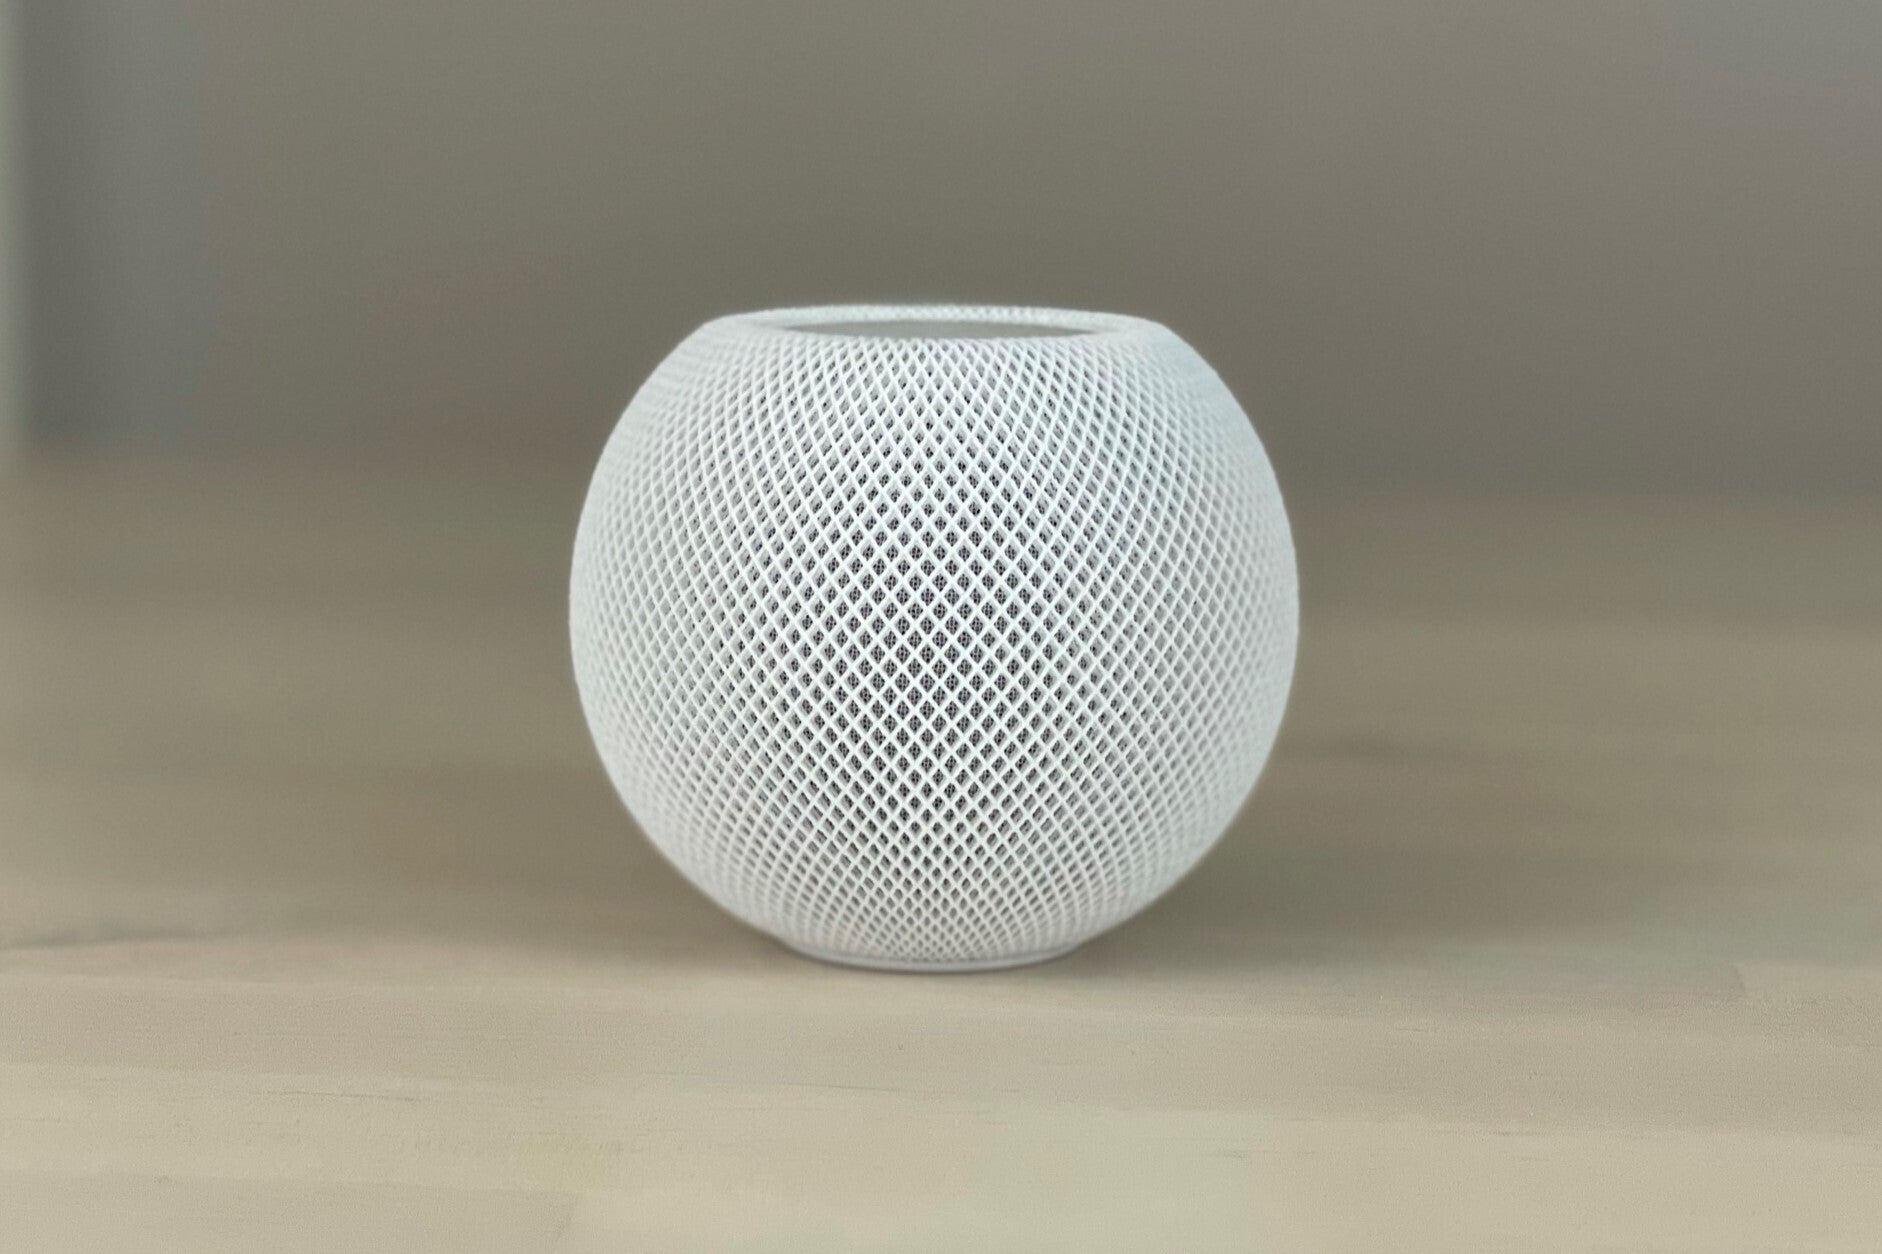 To beat Google in the speaker warfare, Apple needs to deploy its secret mini weapon thumbnail